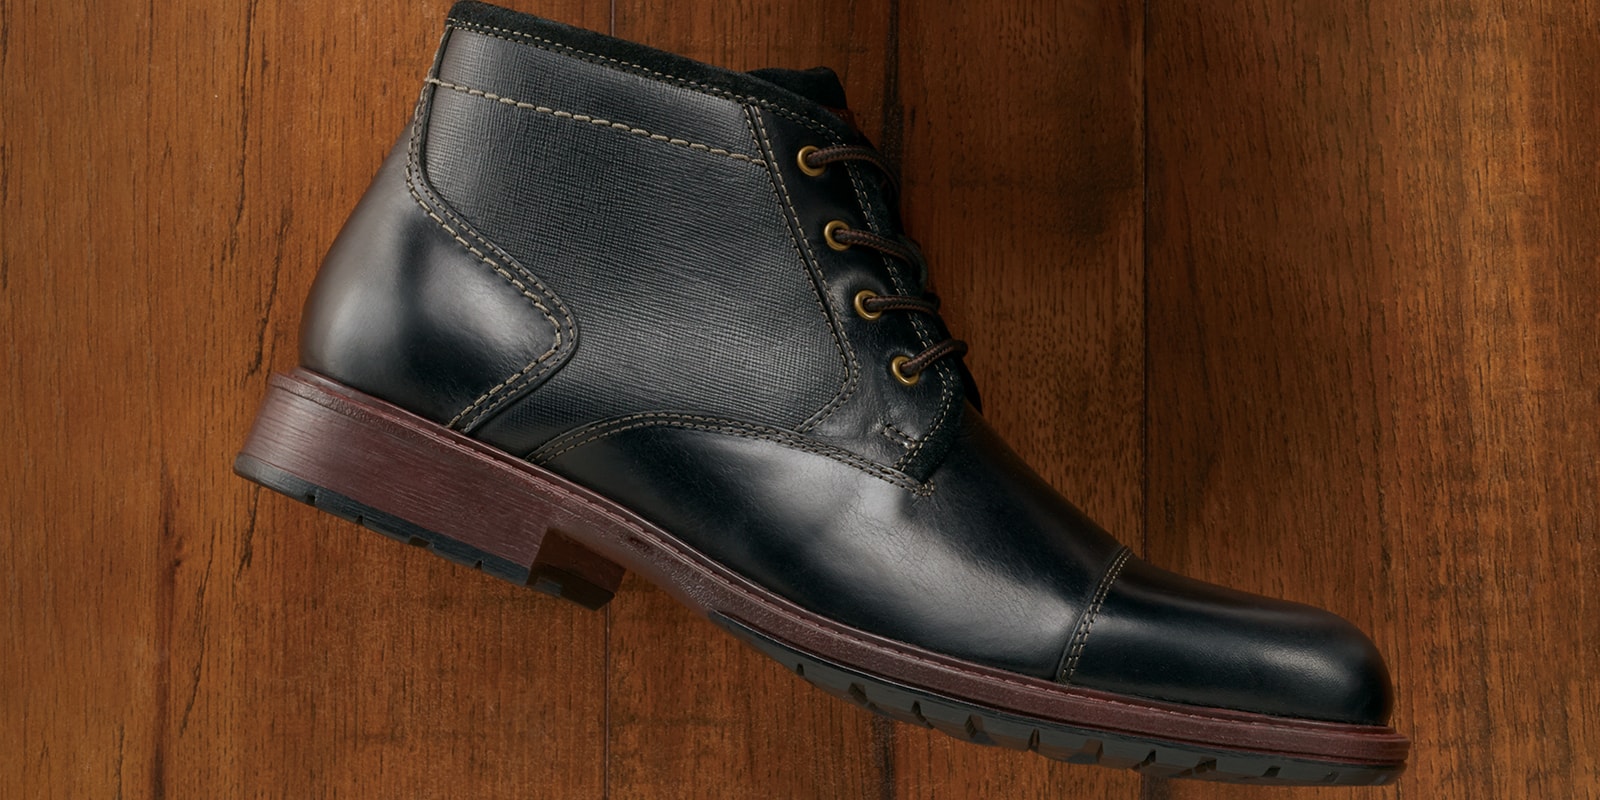 The featured product is the Lodge Plain Toe Gore Boot in Black Crazy Horse.